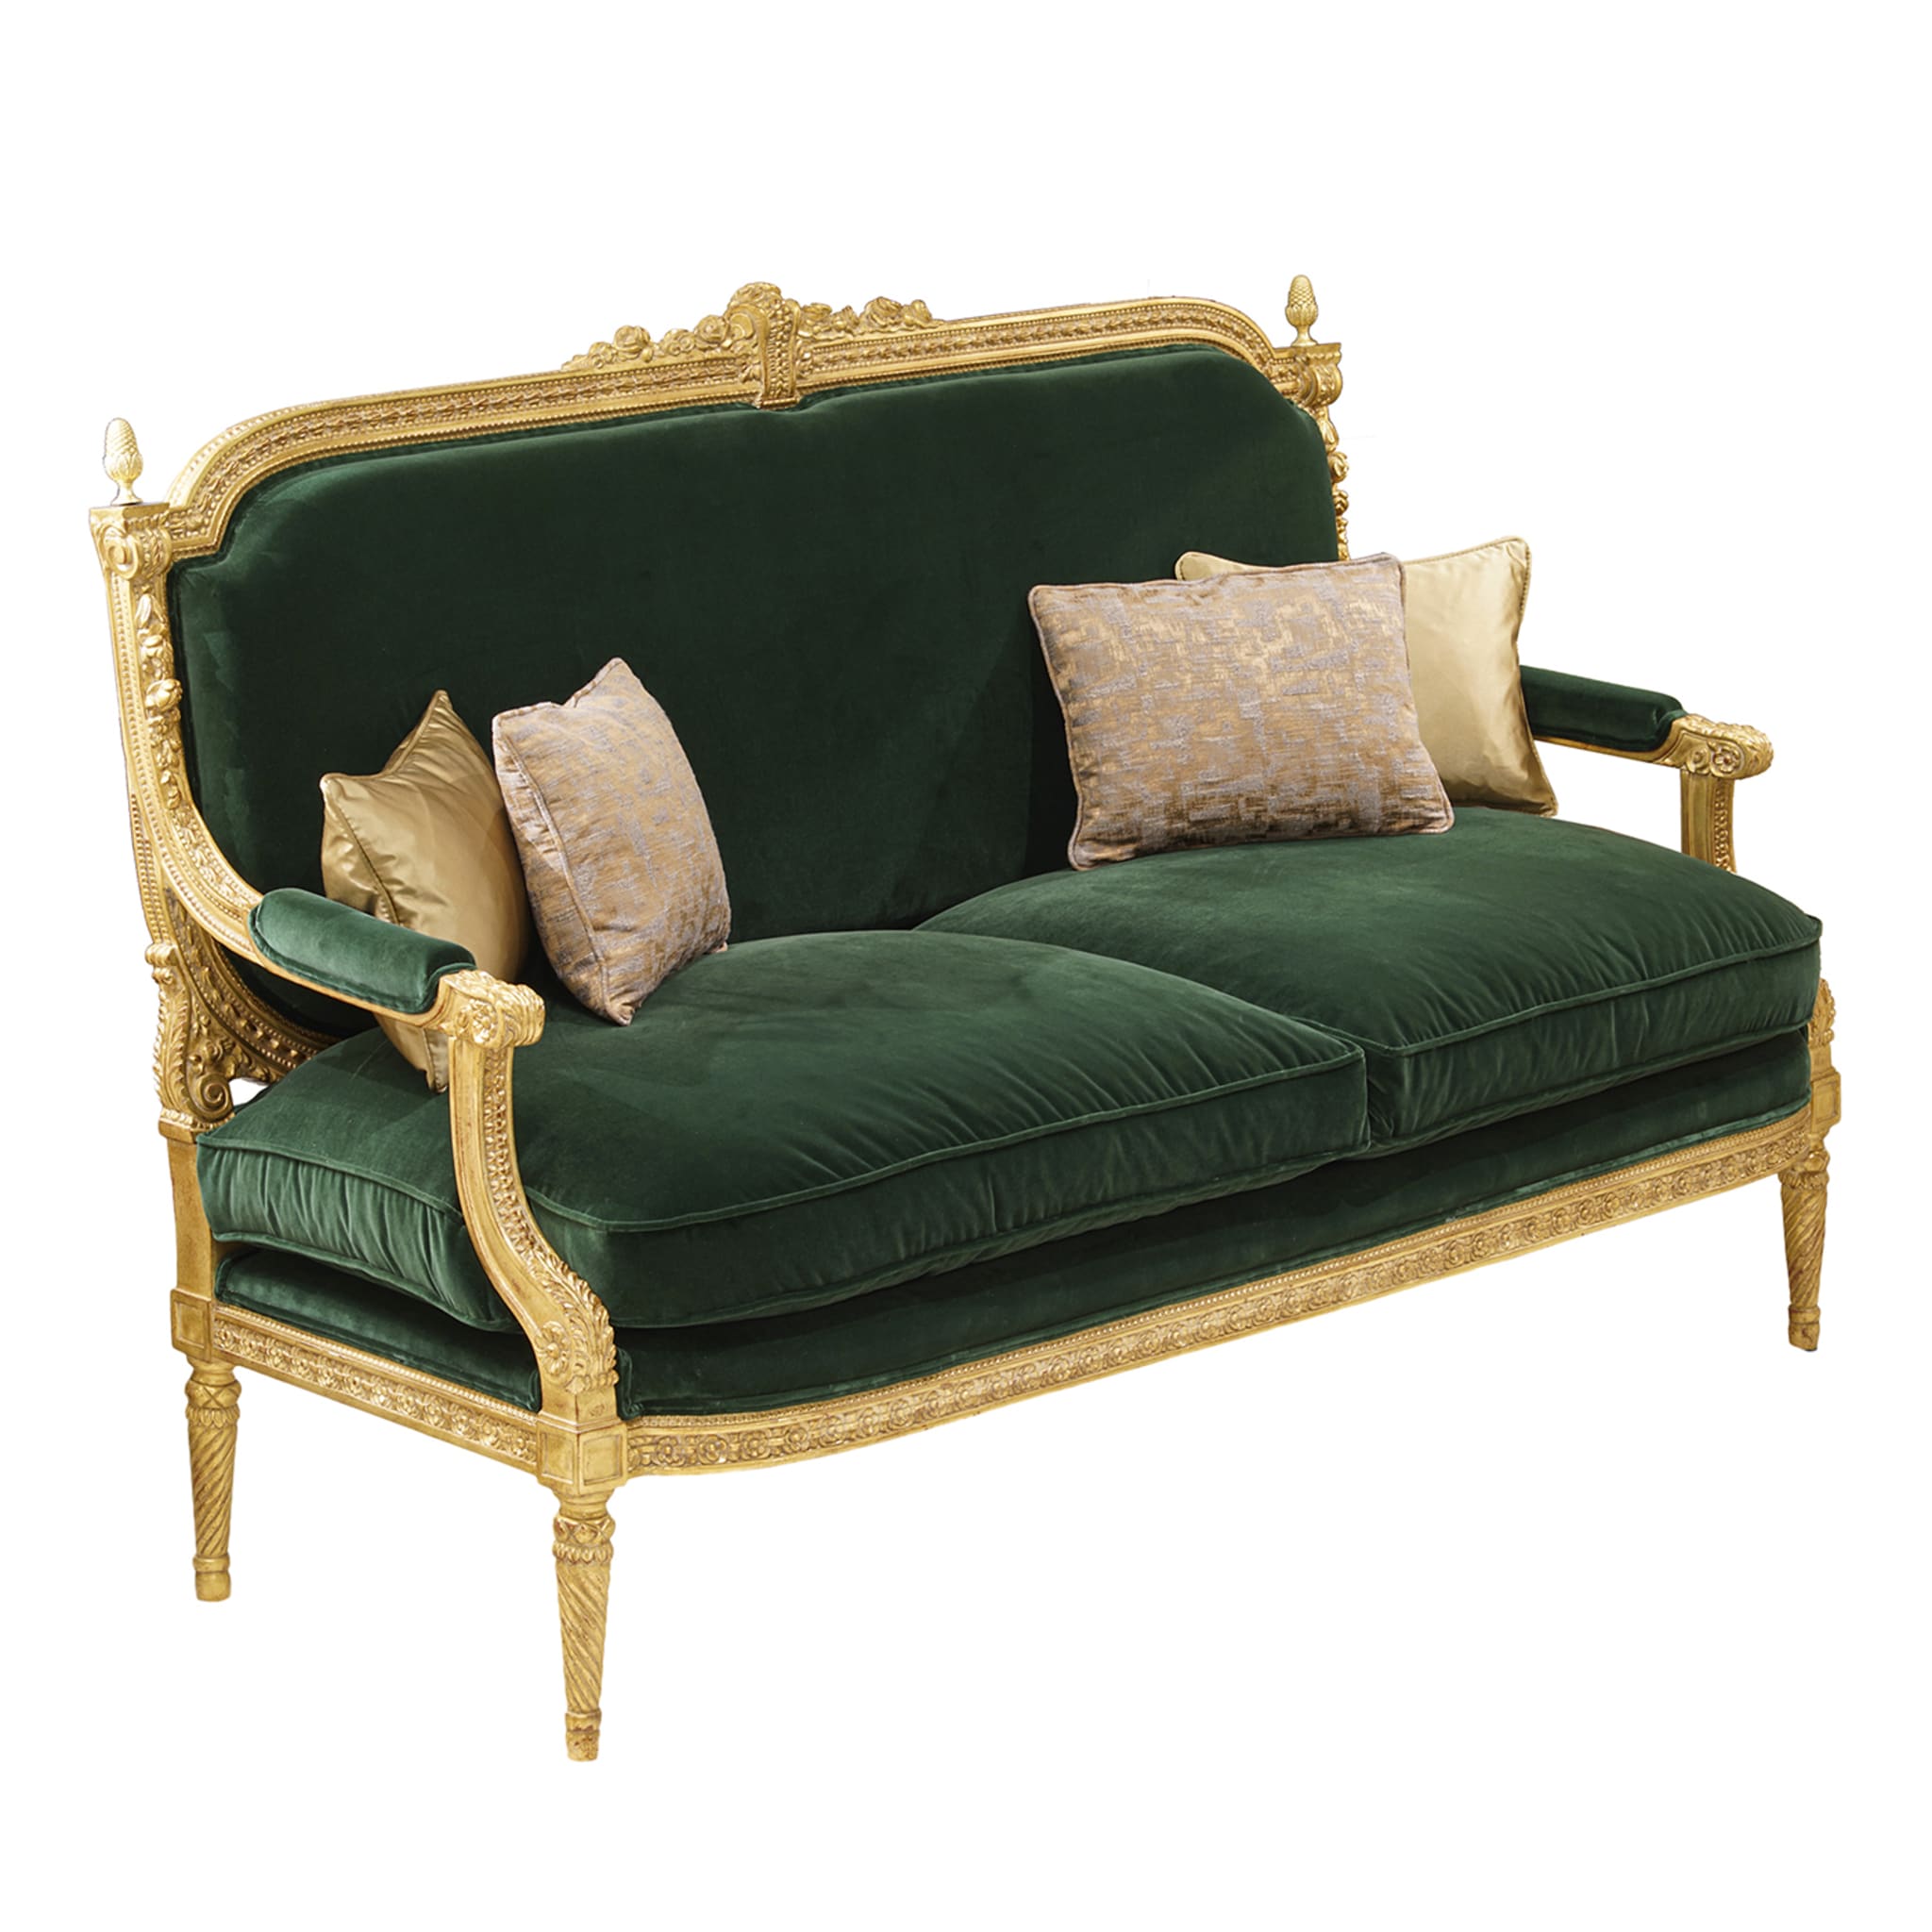 Lous XVI-Style Green and Gold Sofa - Main view